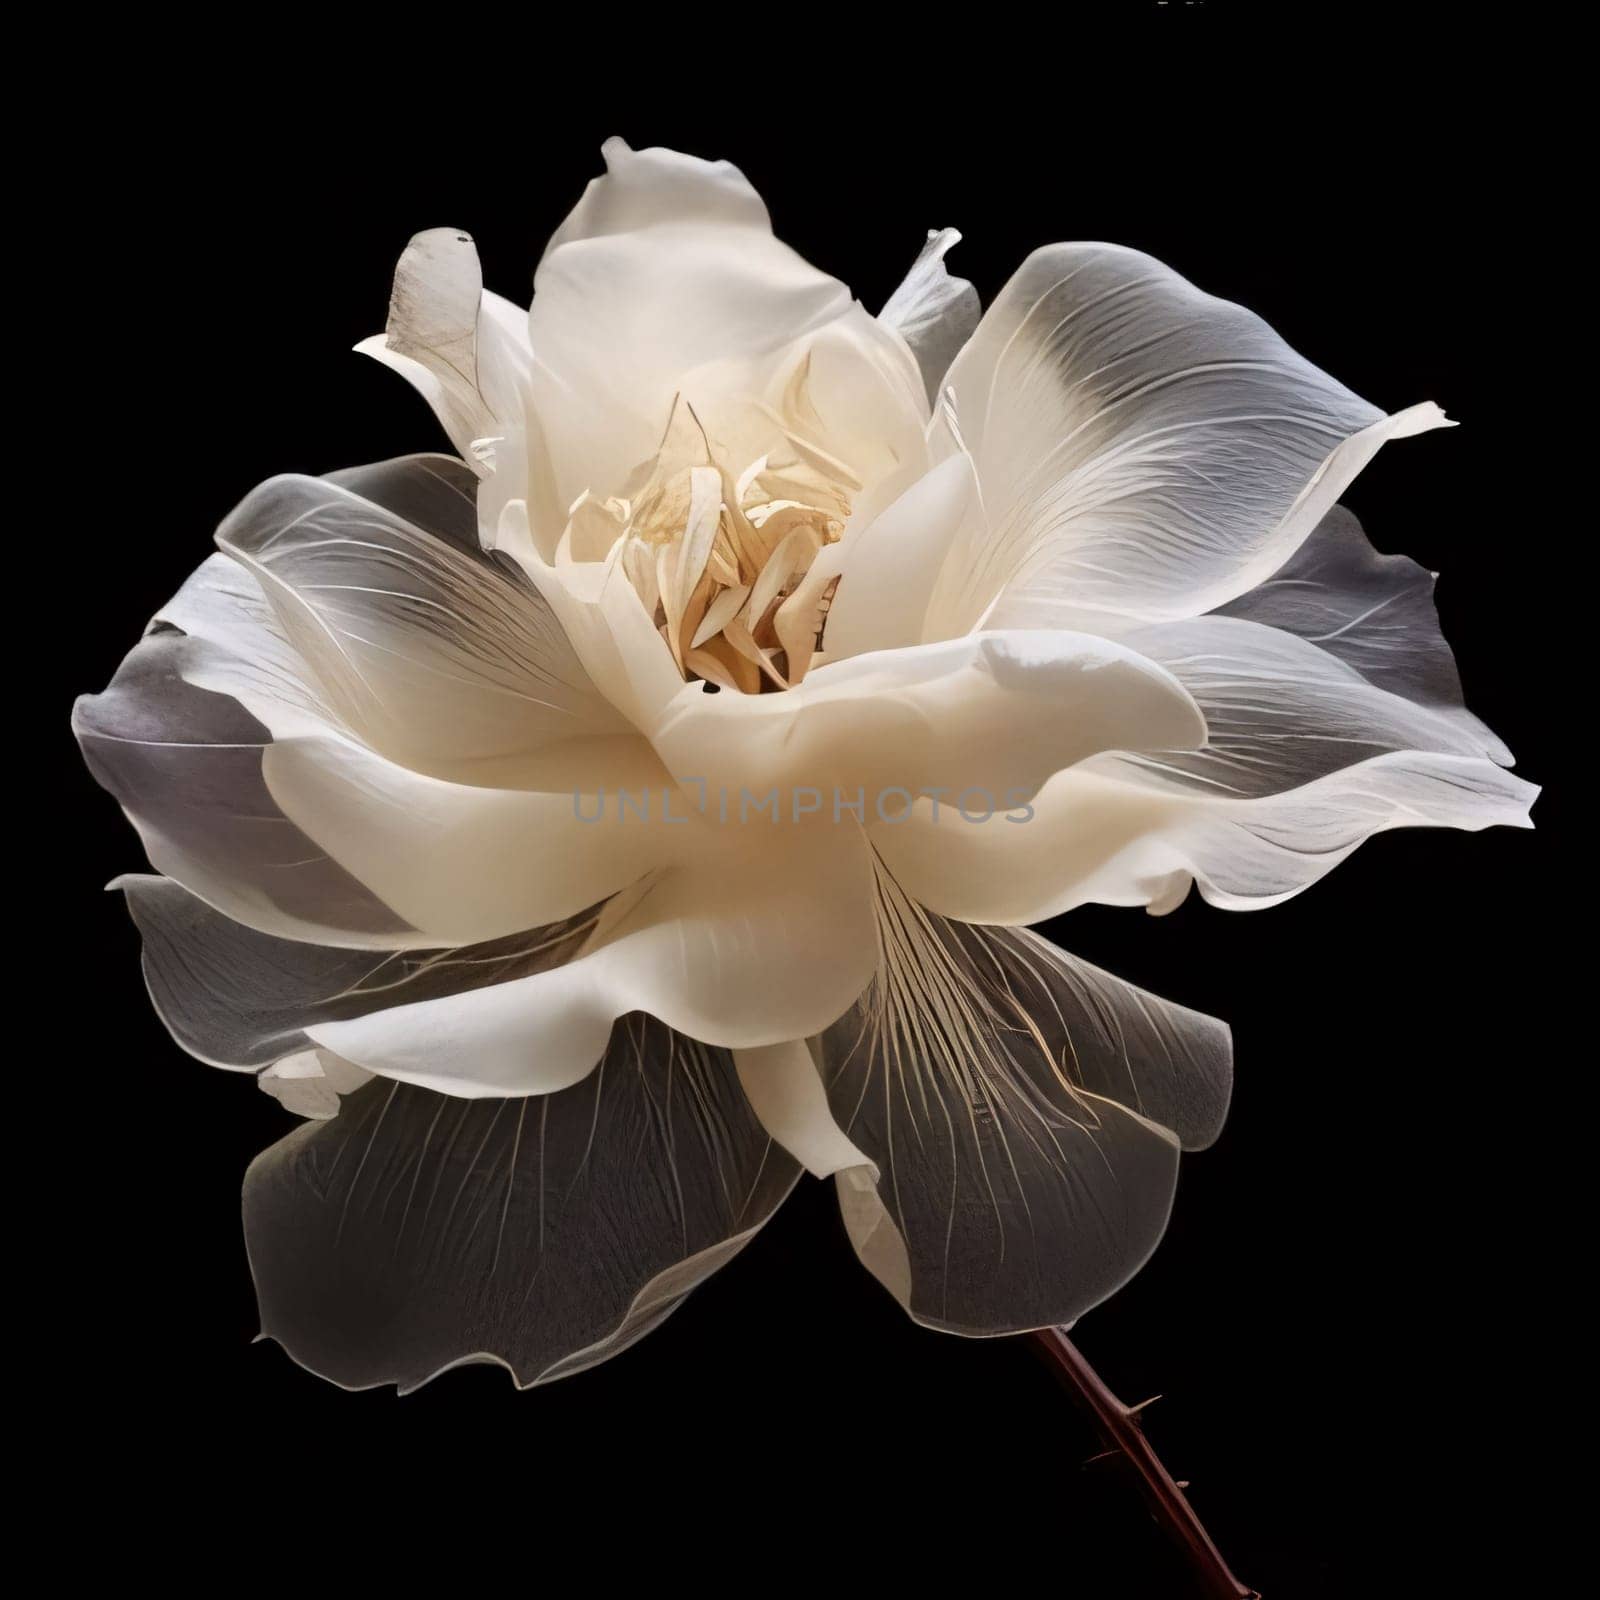 White magnolia flower isolated on black background. Flowering flowers, a symbol of spring, new life. by ThemesS